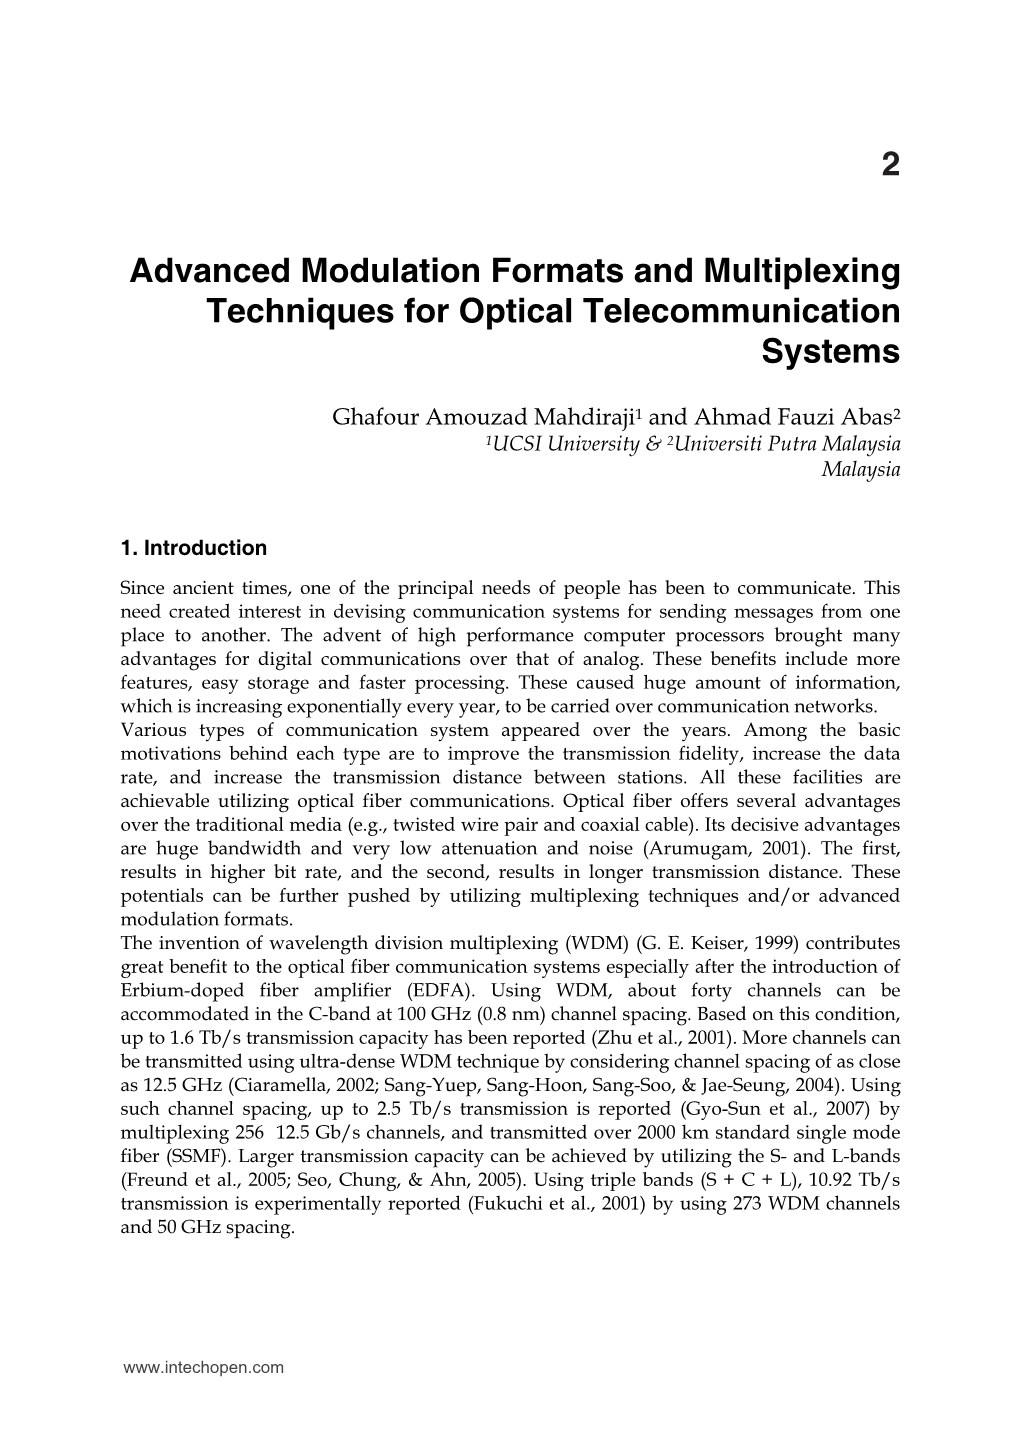 Advanced Modulation Formats and Multiplexing Techniques for Optical Telecommunication Systems 13